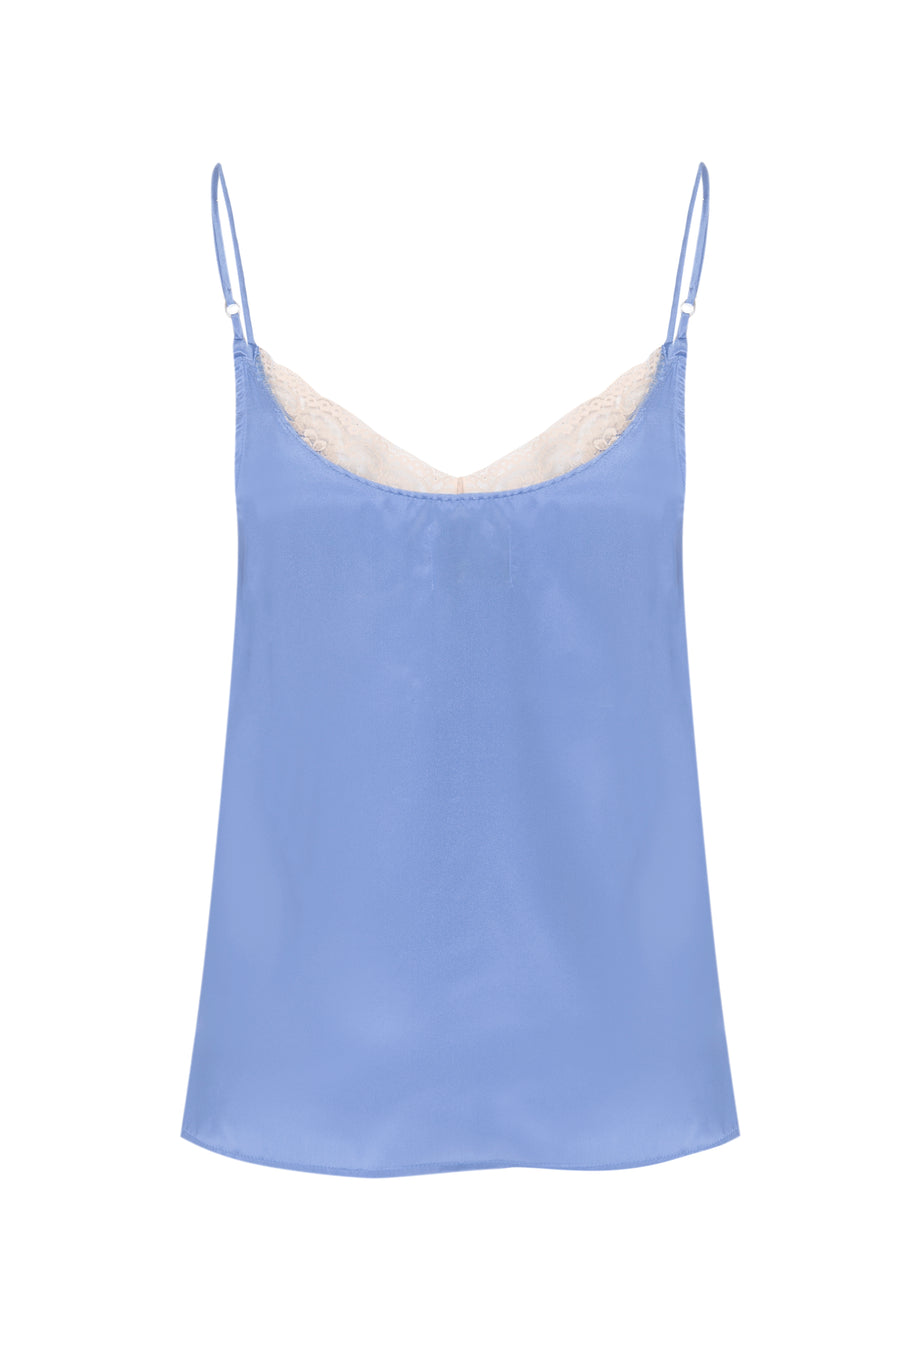 Silk Charmeuse 'August' Tank with Lace: Sky Blue